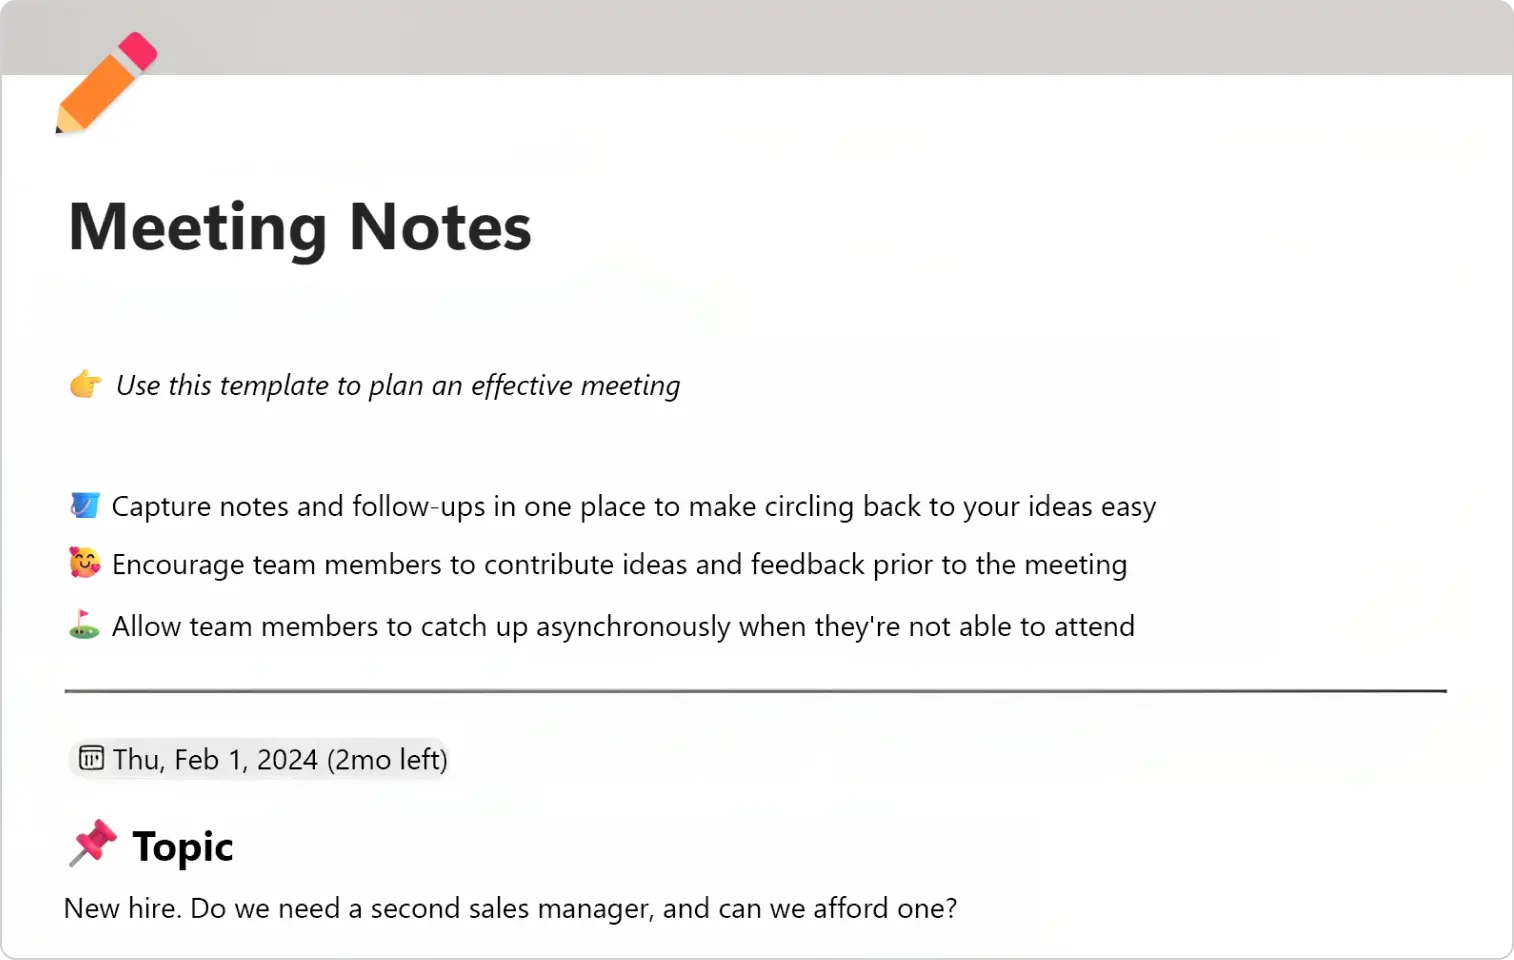 Tips for running effective meetings